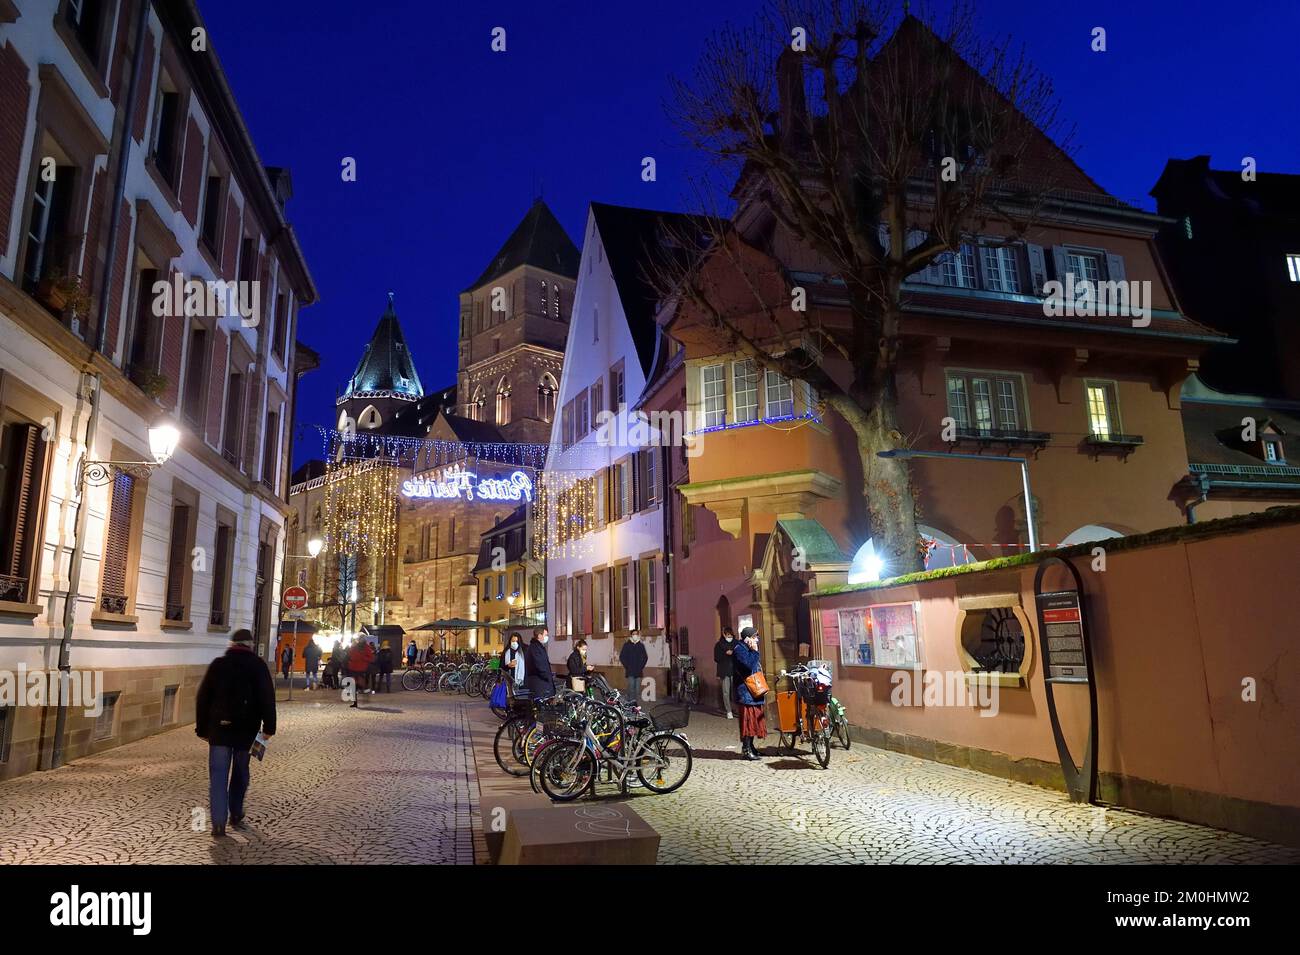 France, Bas Rhin, Strasbourg, old town listed as World Heritage by UNESCO, rue de la Monnaie leading to the Protestant church of Saint-Thomas Stock Photo